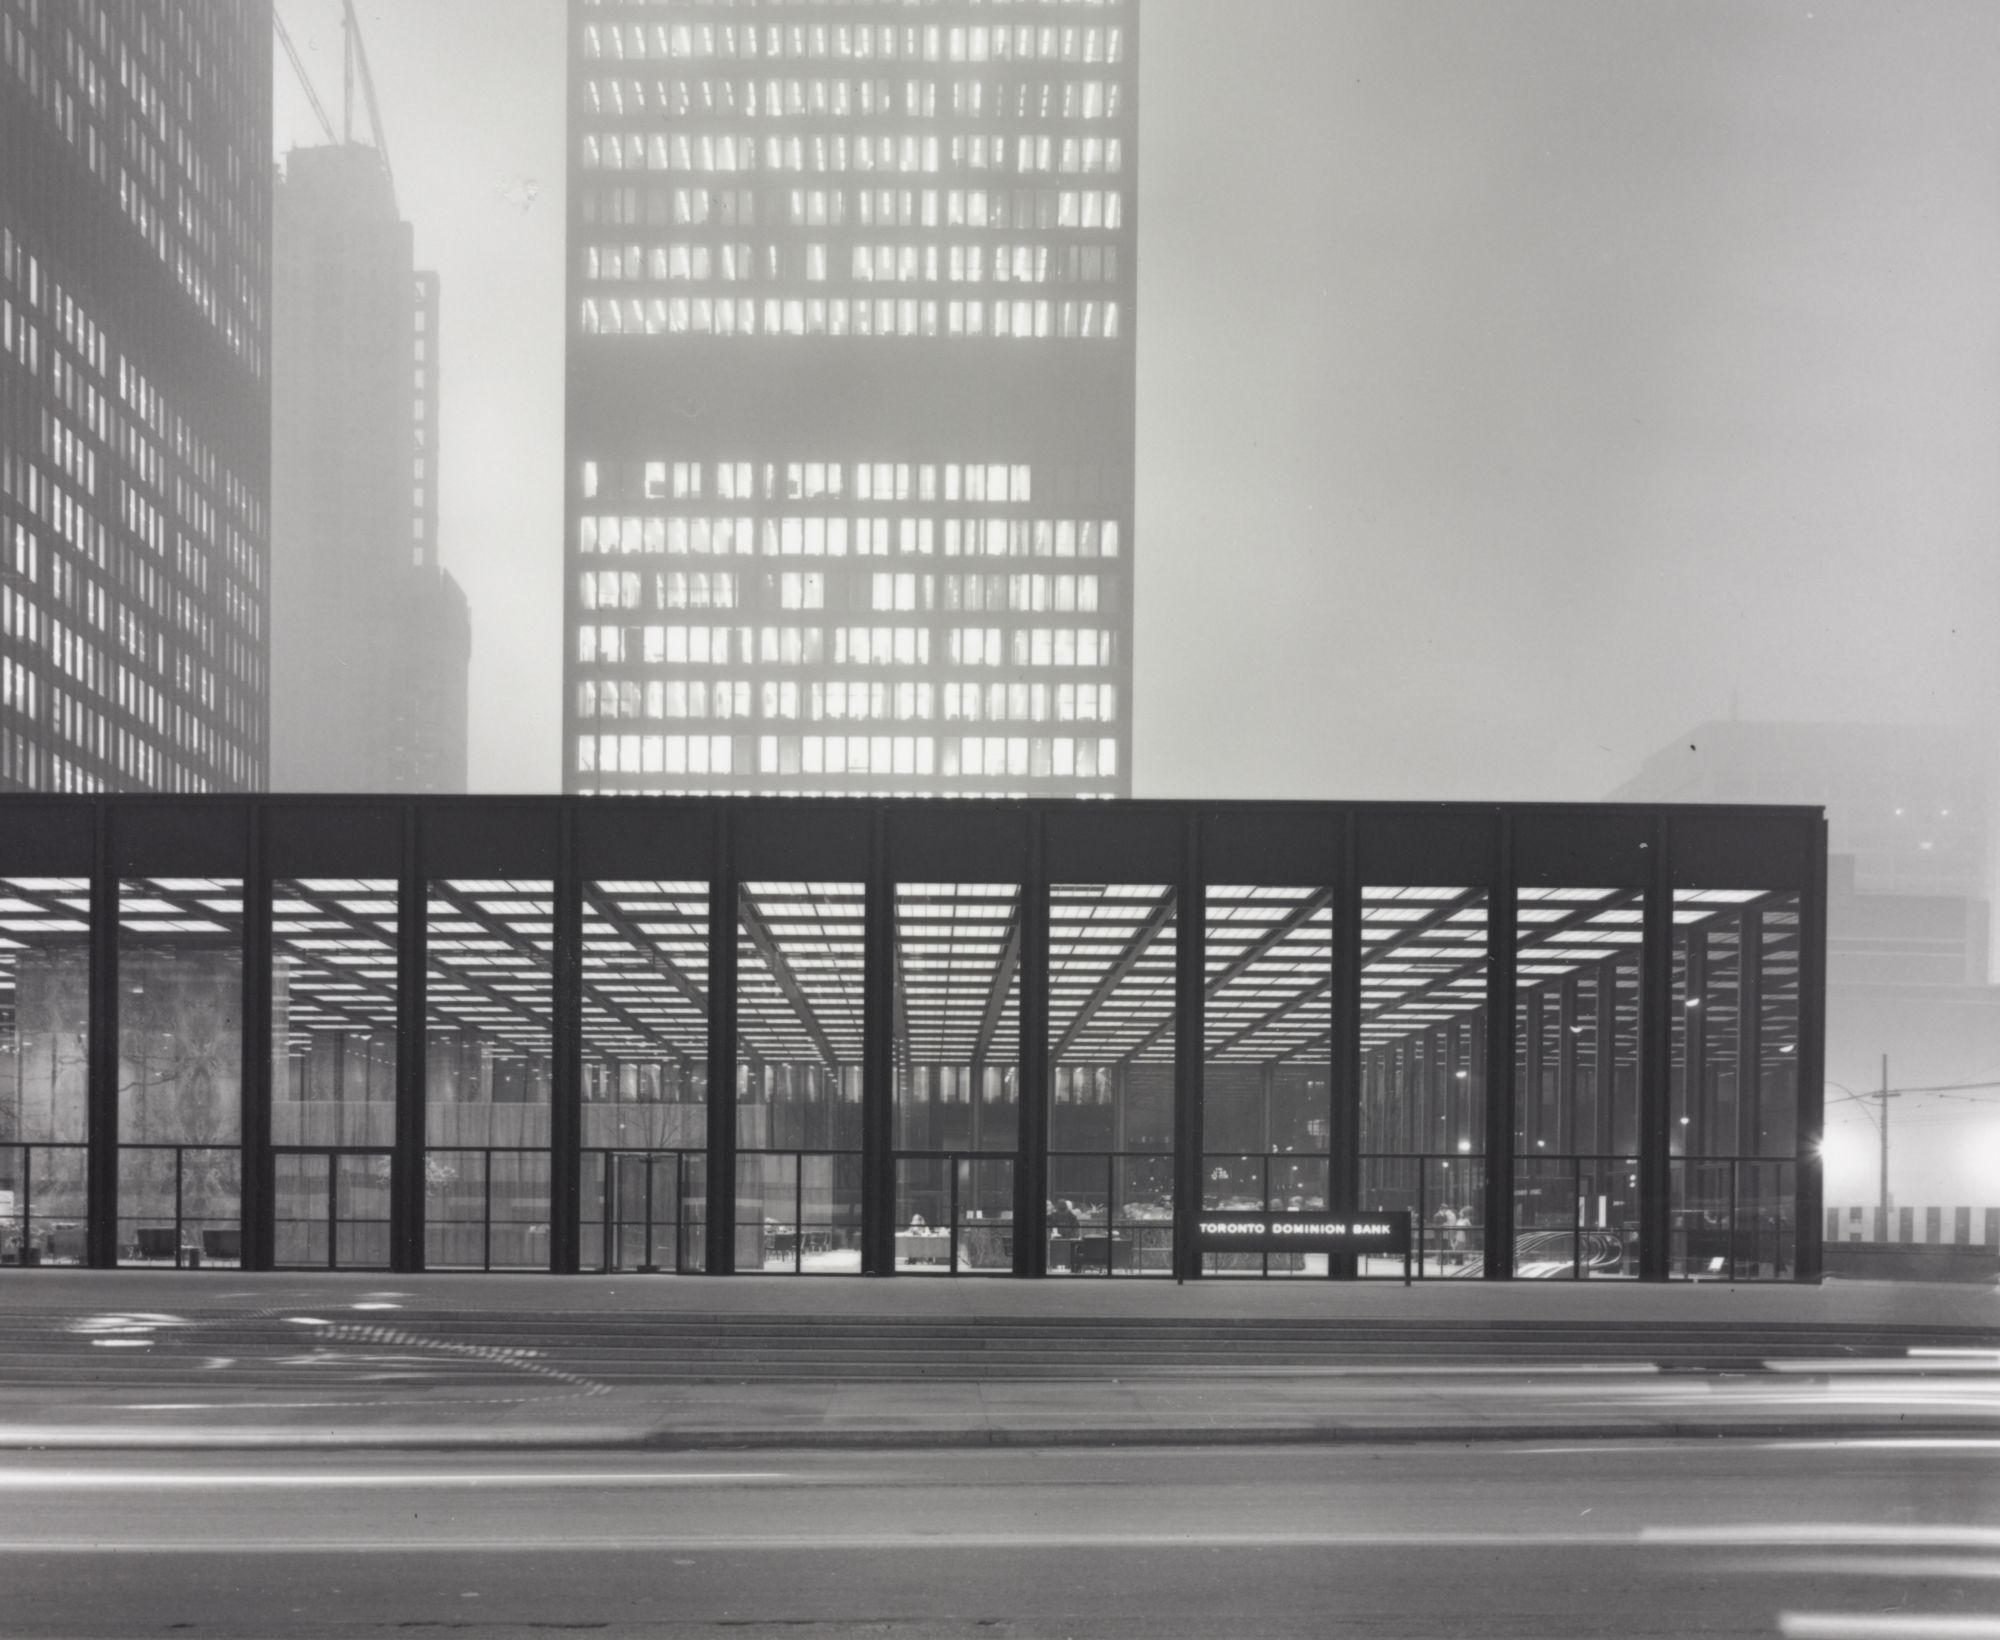 Black and white photograph shows pavilion, two completed towers, and one under construction of the Toronto-Dominion Centre by architect Mies van der Rohe.